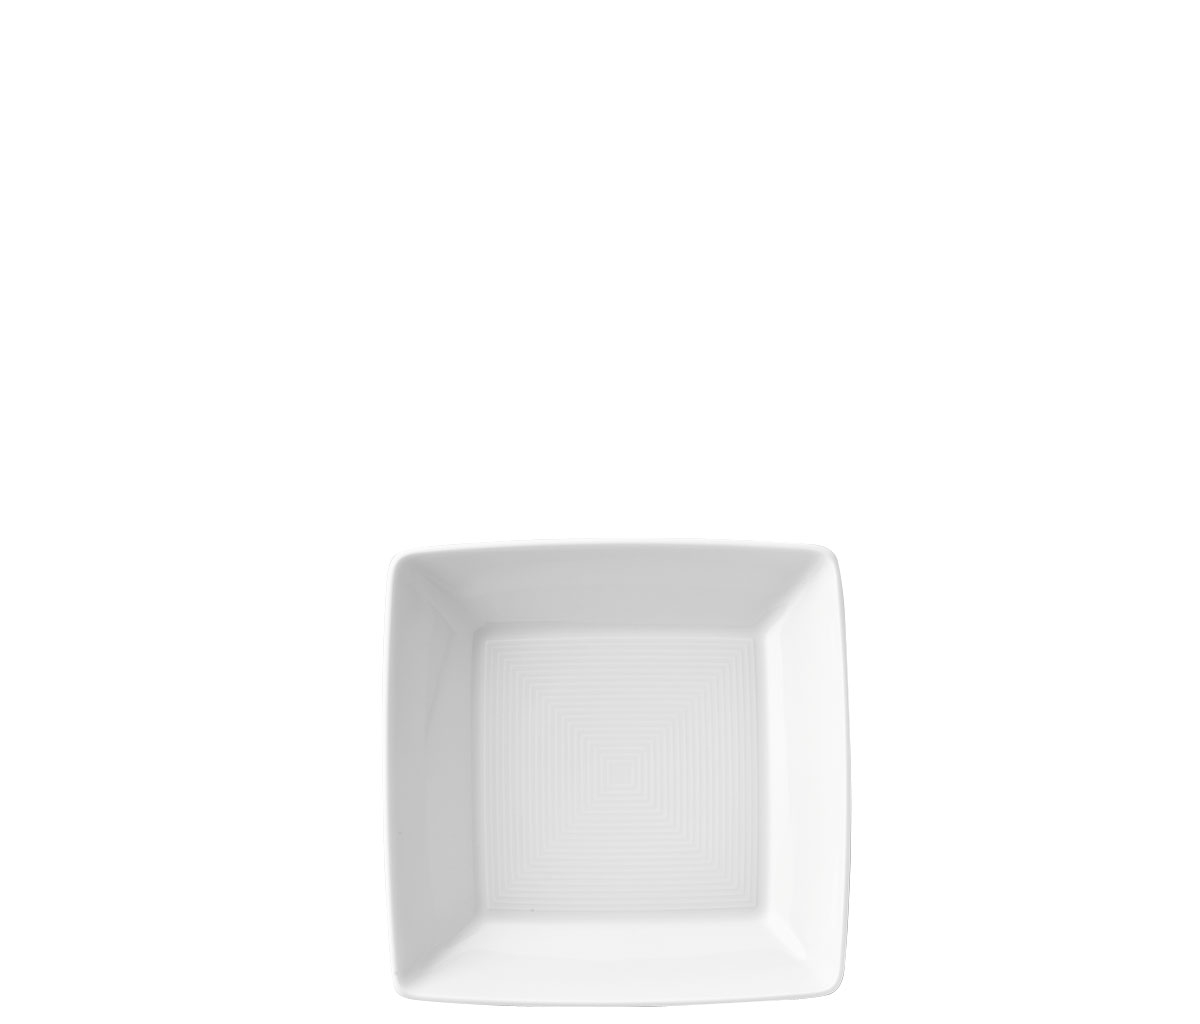 Thomas by Rosenthal Loft Square Bread and Butter Plate - White